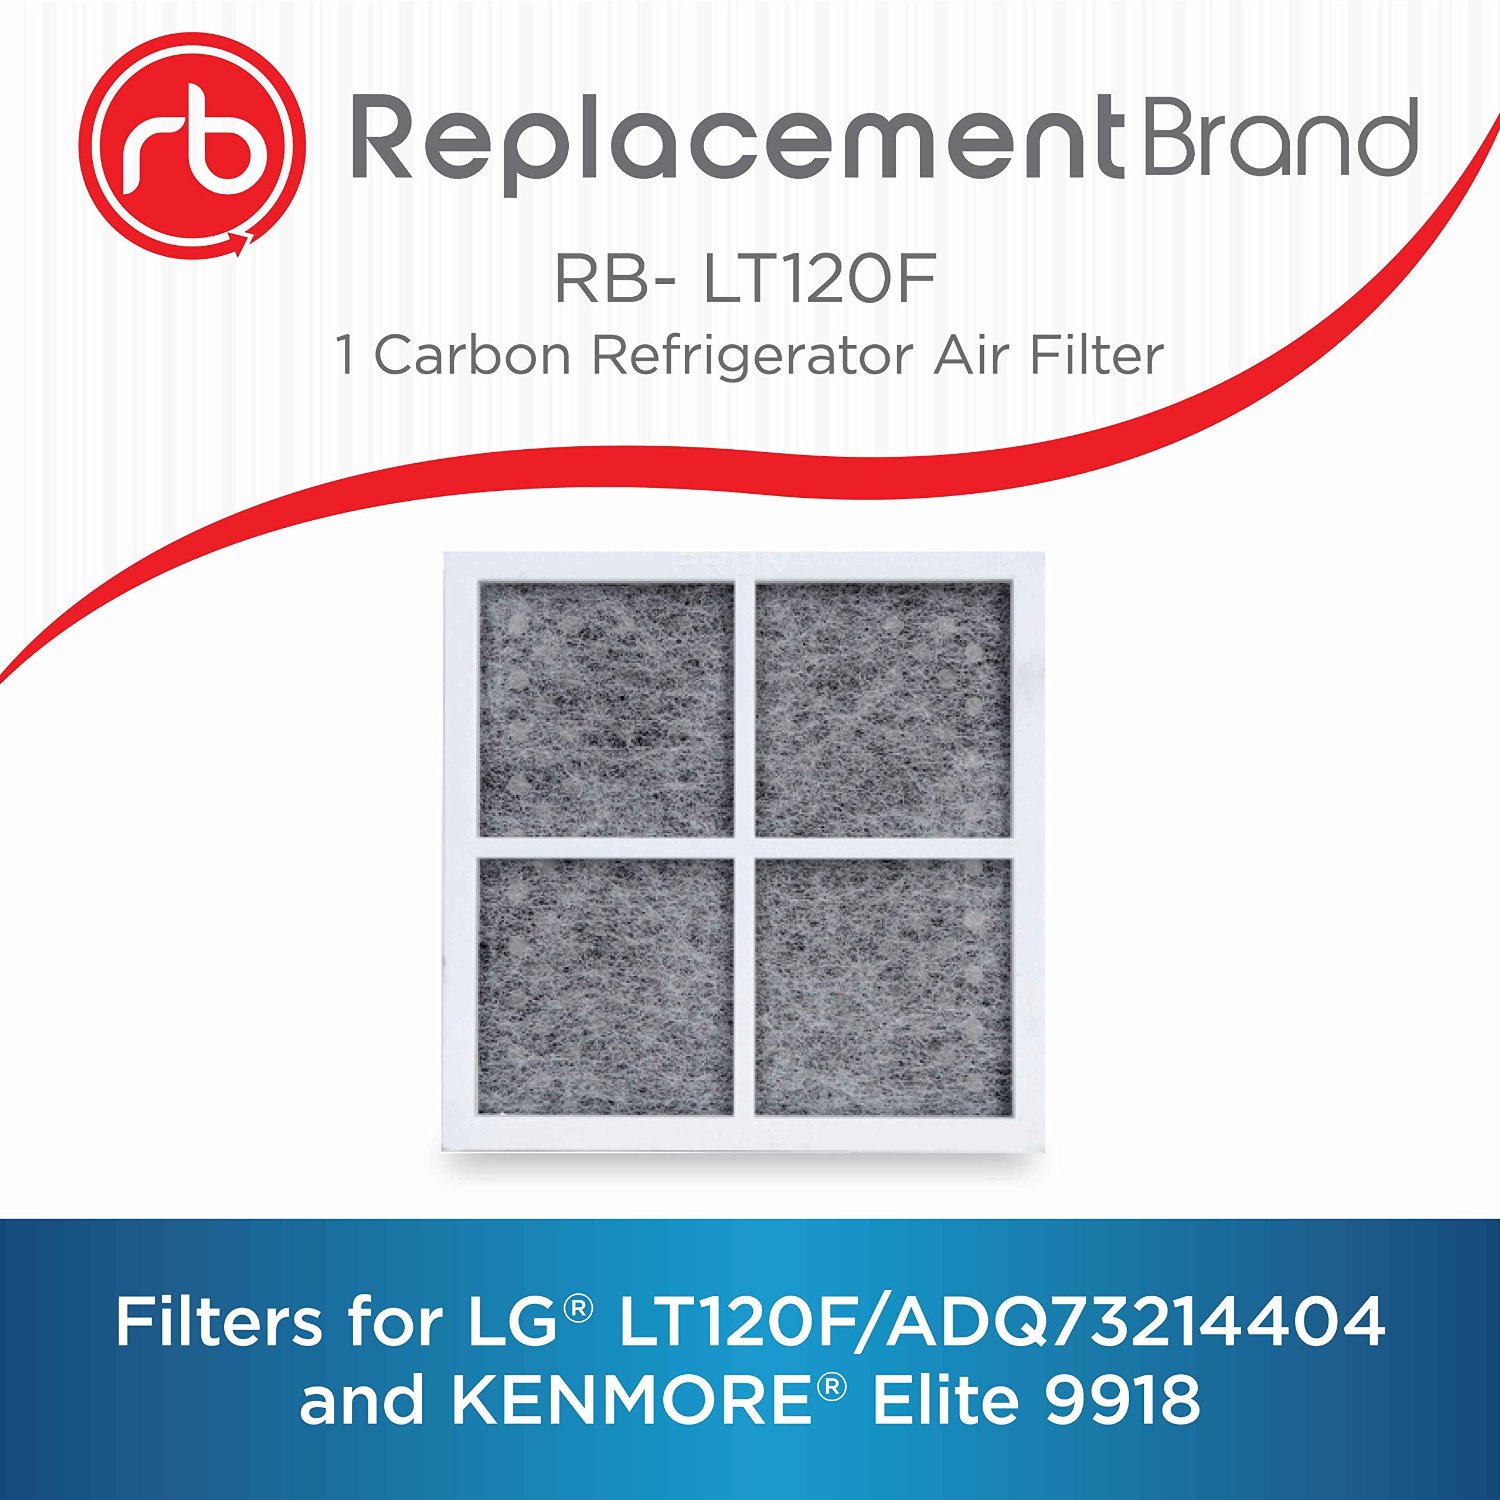 ReplacementBrand: RB-L4 Replaces LT120F ADQ73214404 Refrigerator Air Filter